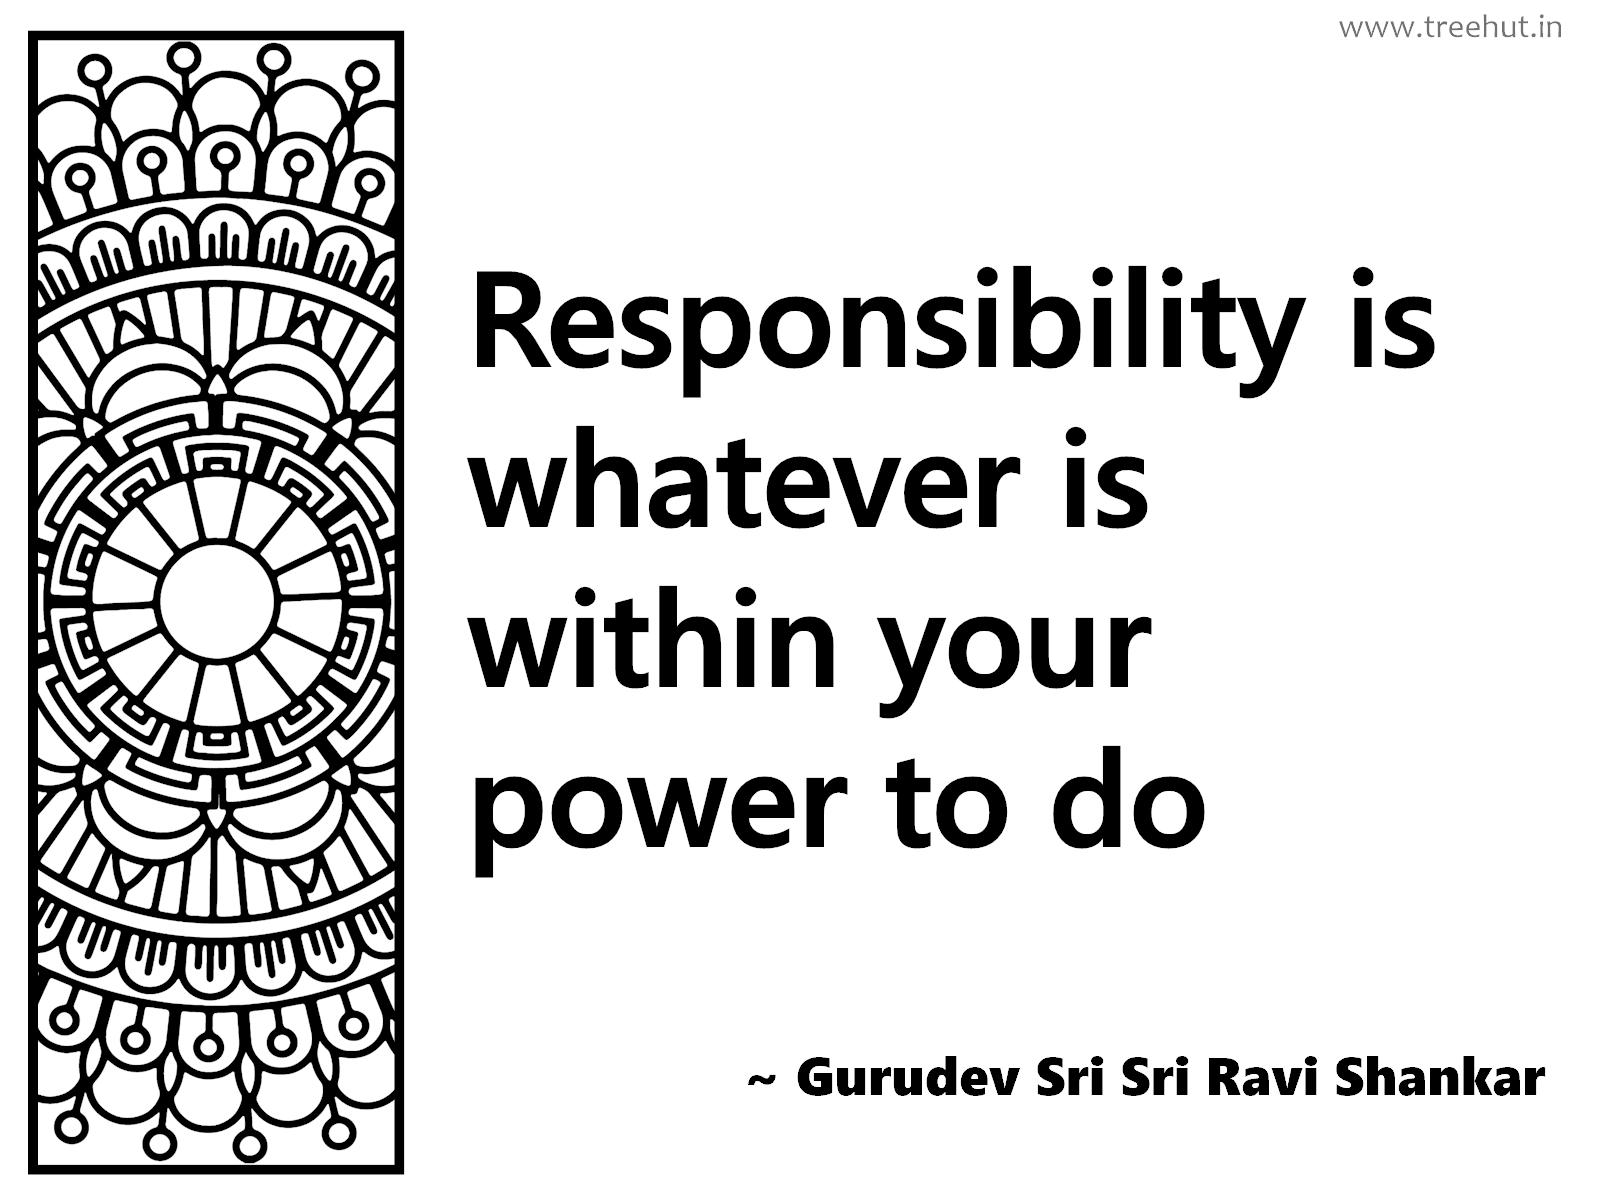 Responsibility is whatever is within your power to do Inspirational Quote by Gurudev Sri Sri Ravi Shankar, coloring pages